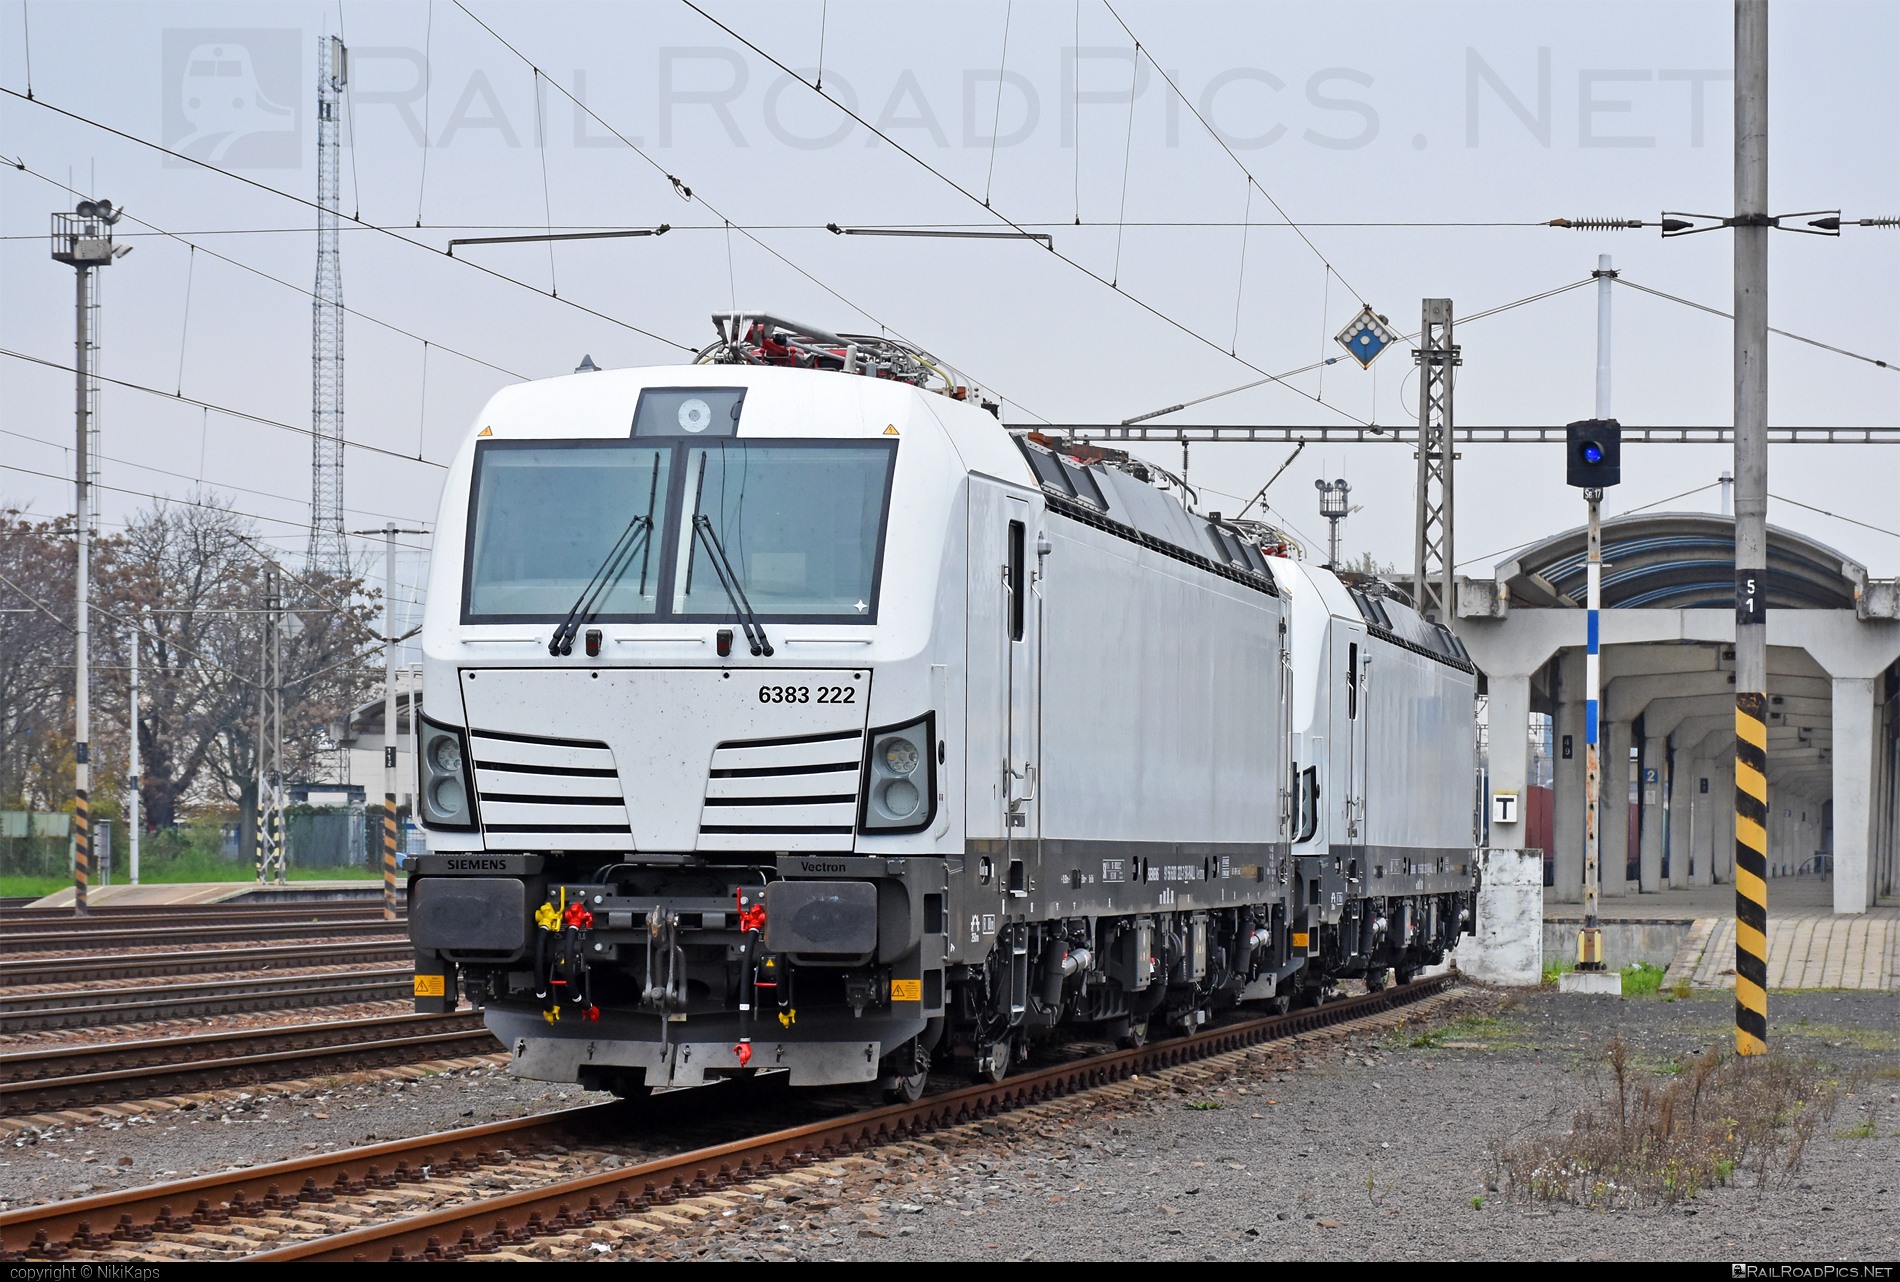 Siemens Vectron MS - 6383 222 operated by LOKORAIL, a.s. #RollingStockLease #RollingStockLeaseSro #budamar #lokorail #lrl #raill #siemens #siemensVectron #siemensVectronMS #vectron #vectronMS